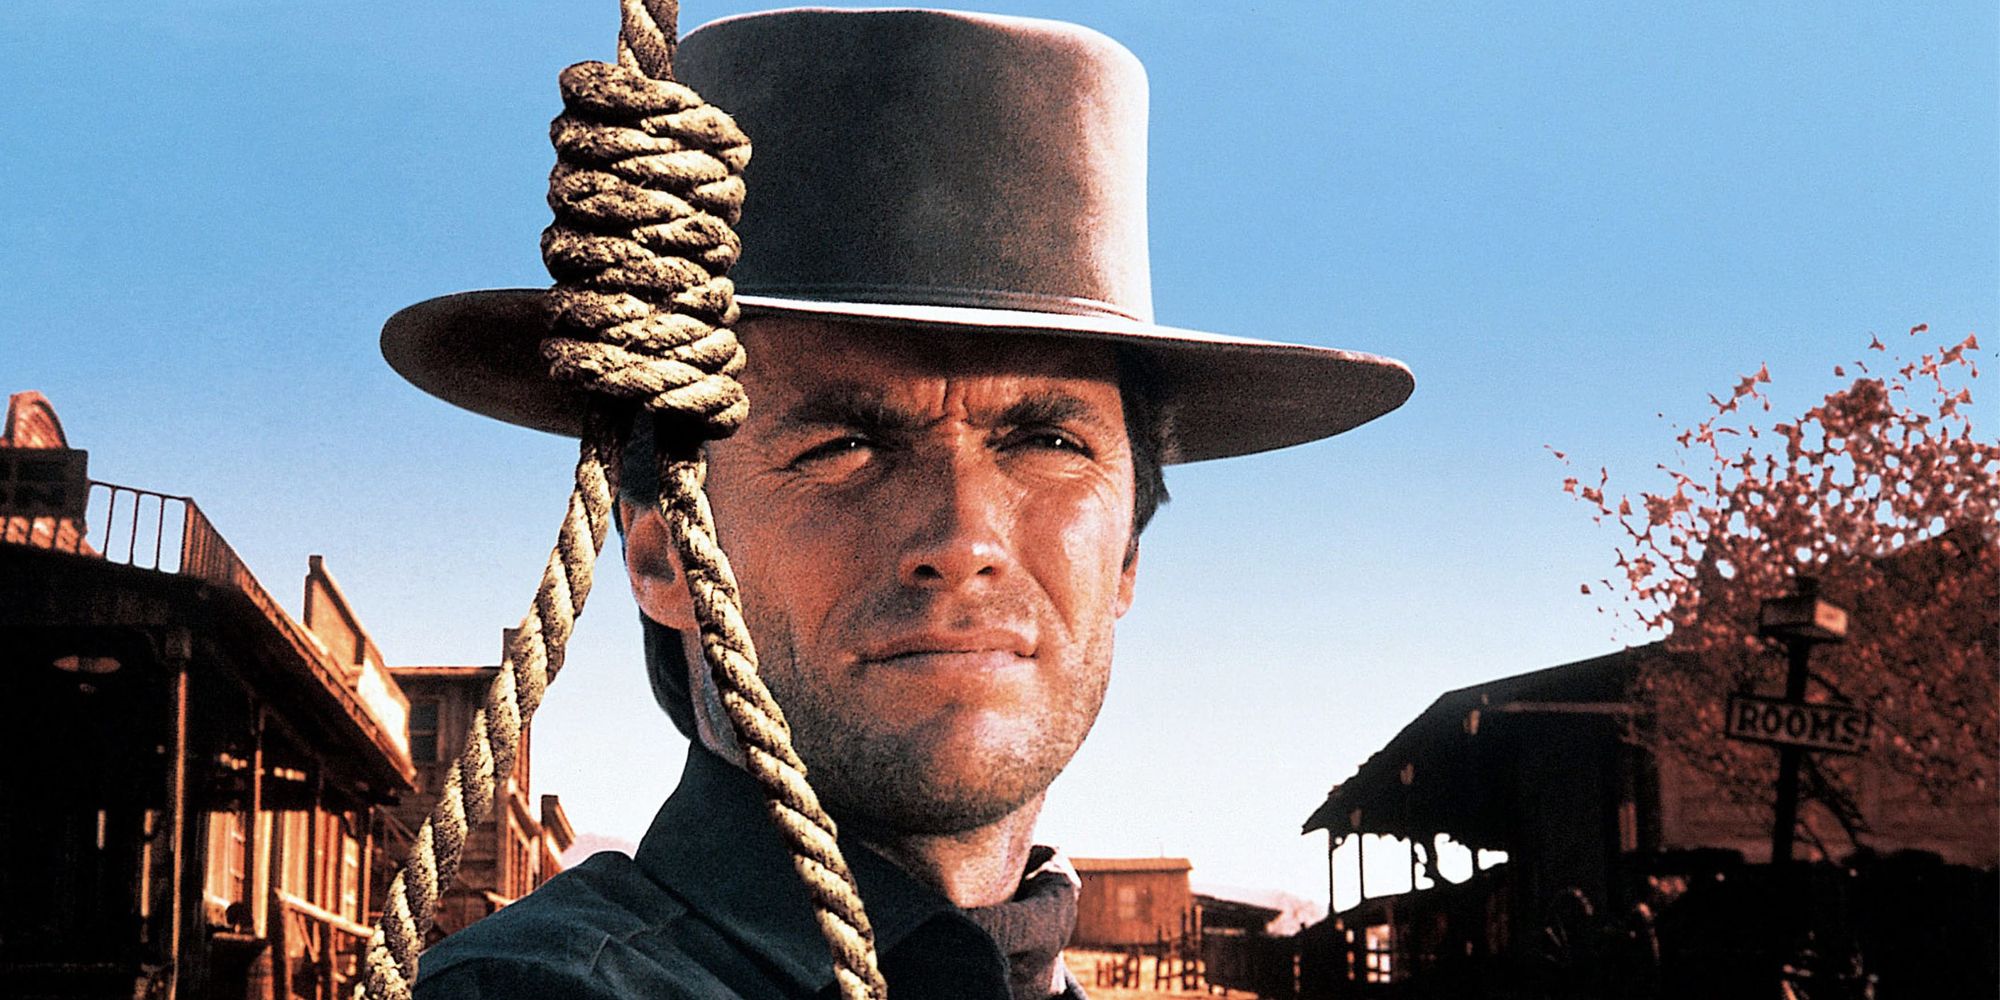 Jed Cooper wearing a cowboy hat, with a rope next to him